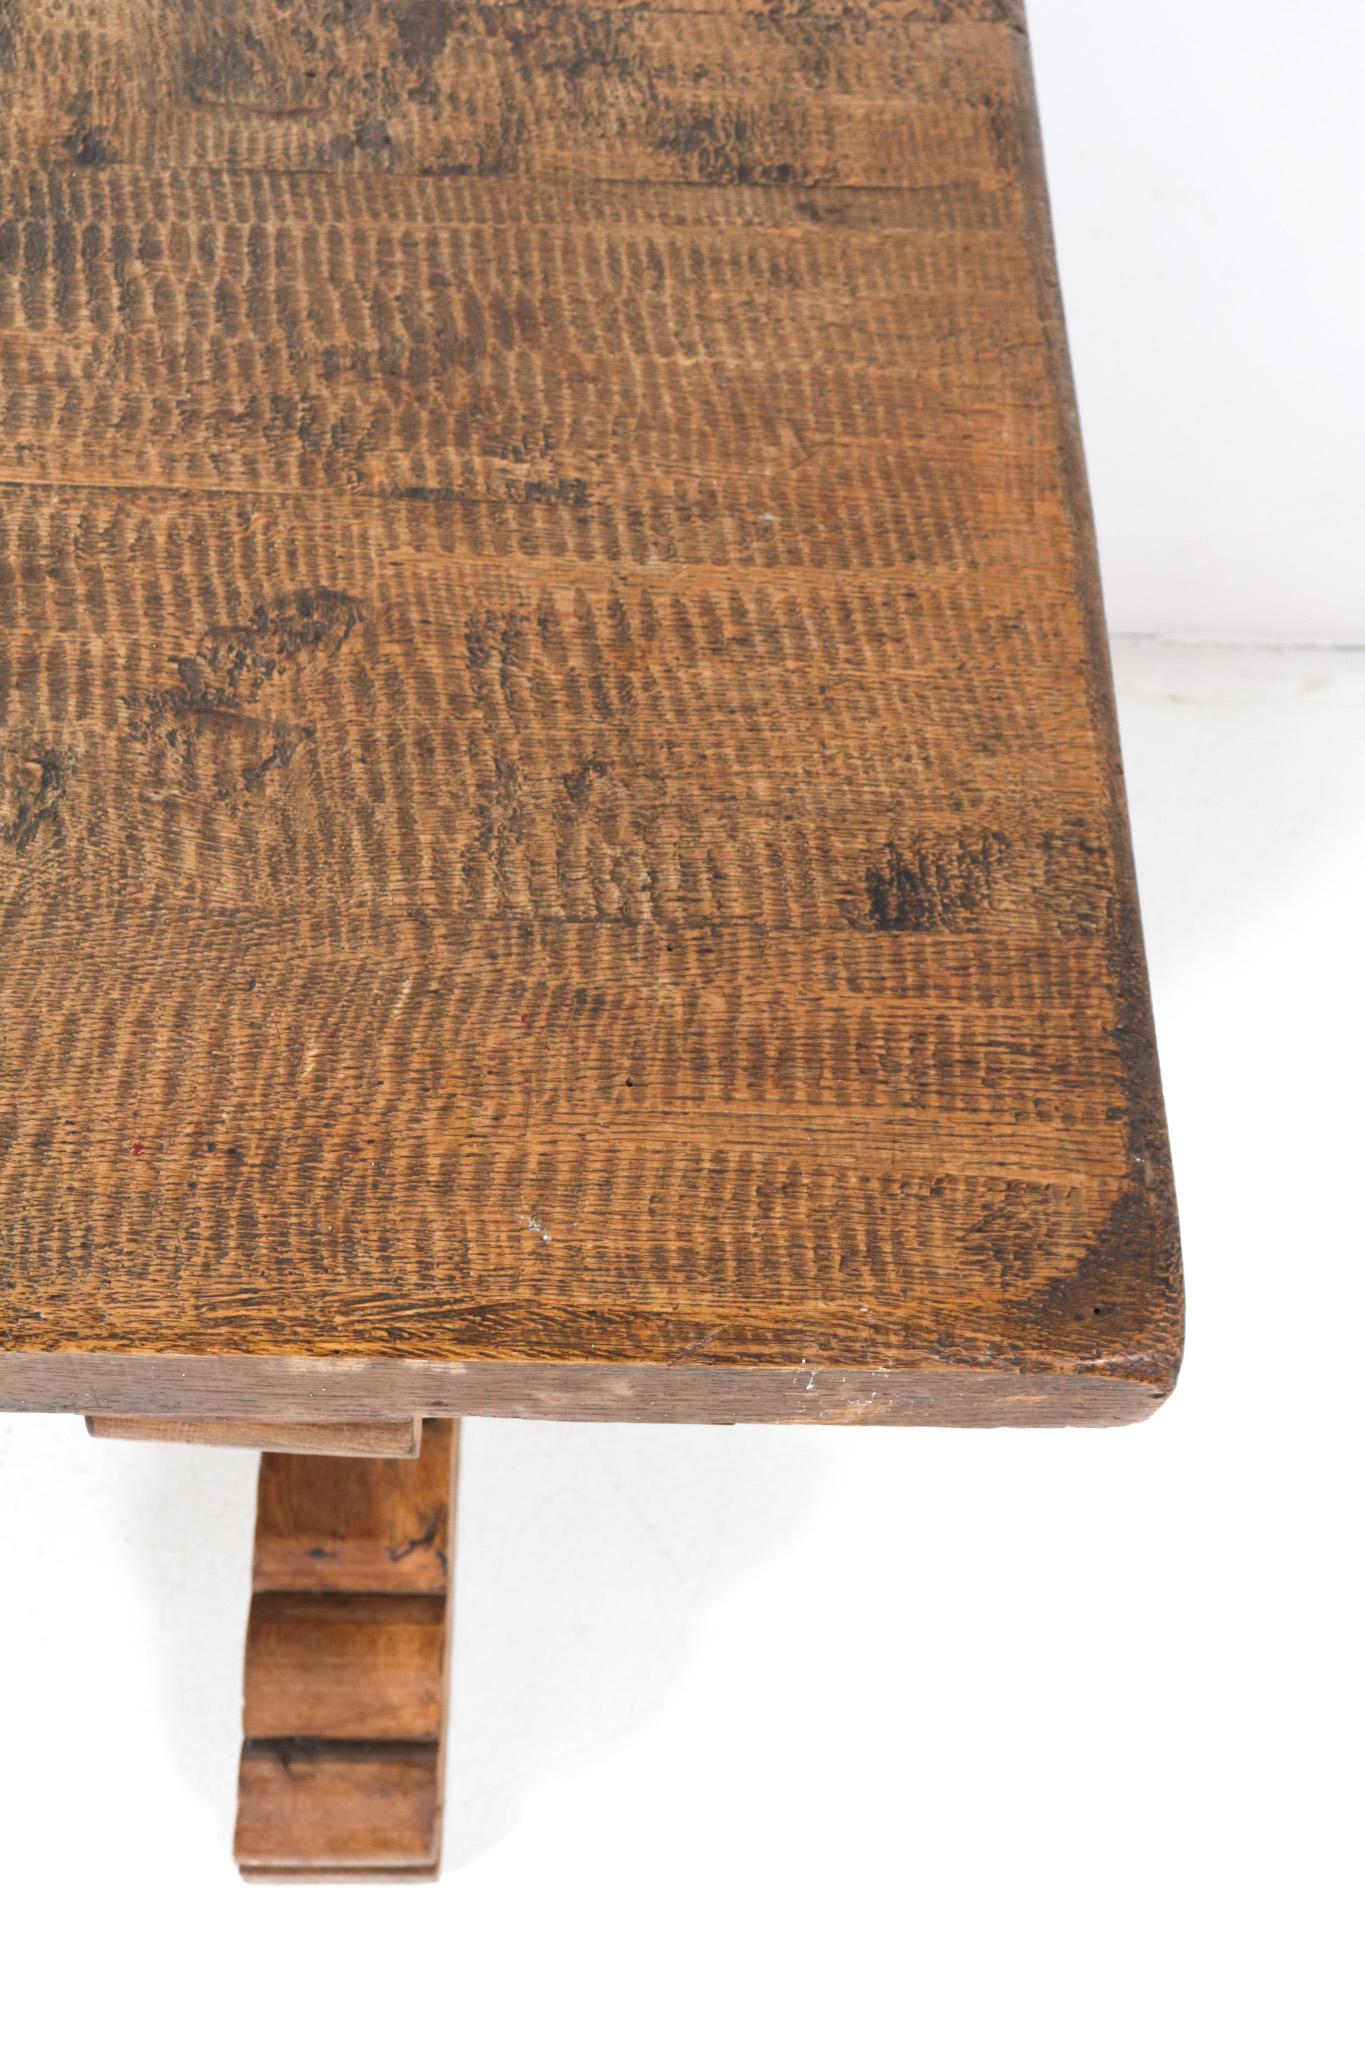 Oak Brutalist Dining Room Table or Refectory Table, 1970s For Sale 4